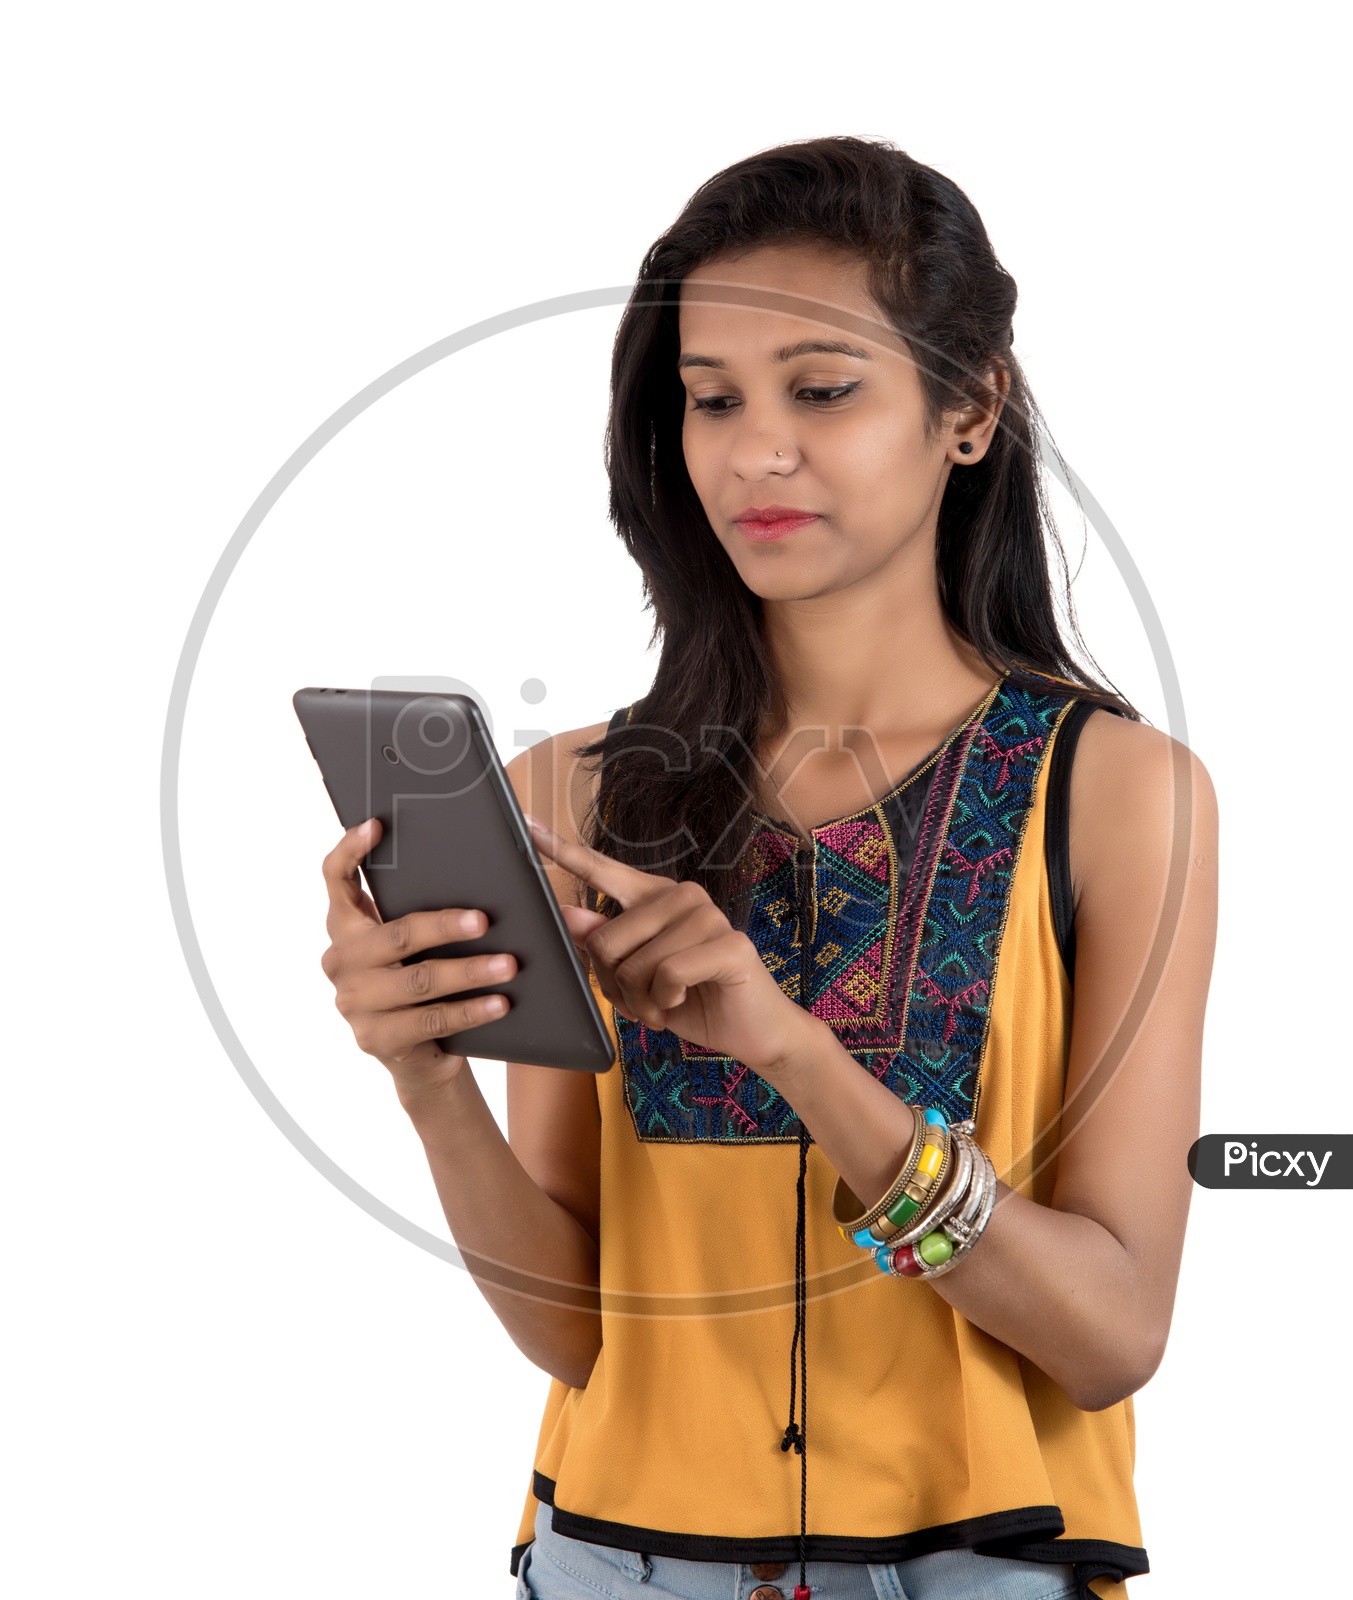 Young  Indian Girl Using  Tab Or Tablet Gadget on an Isolated  White Background